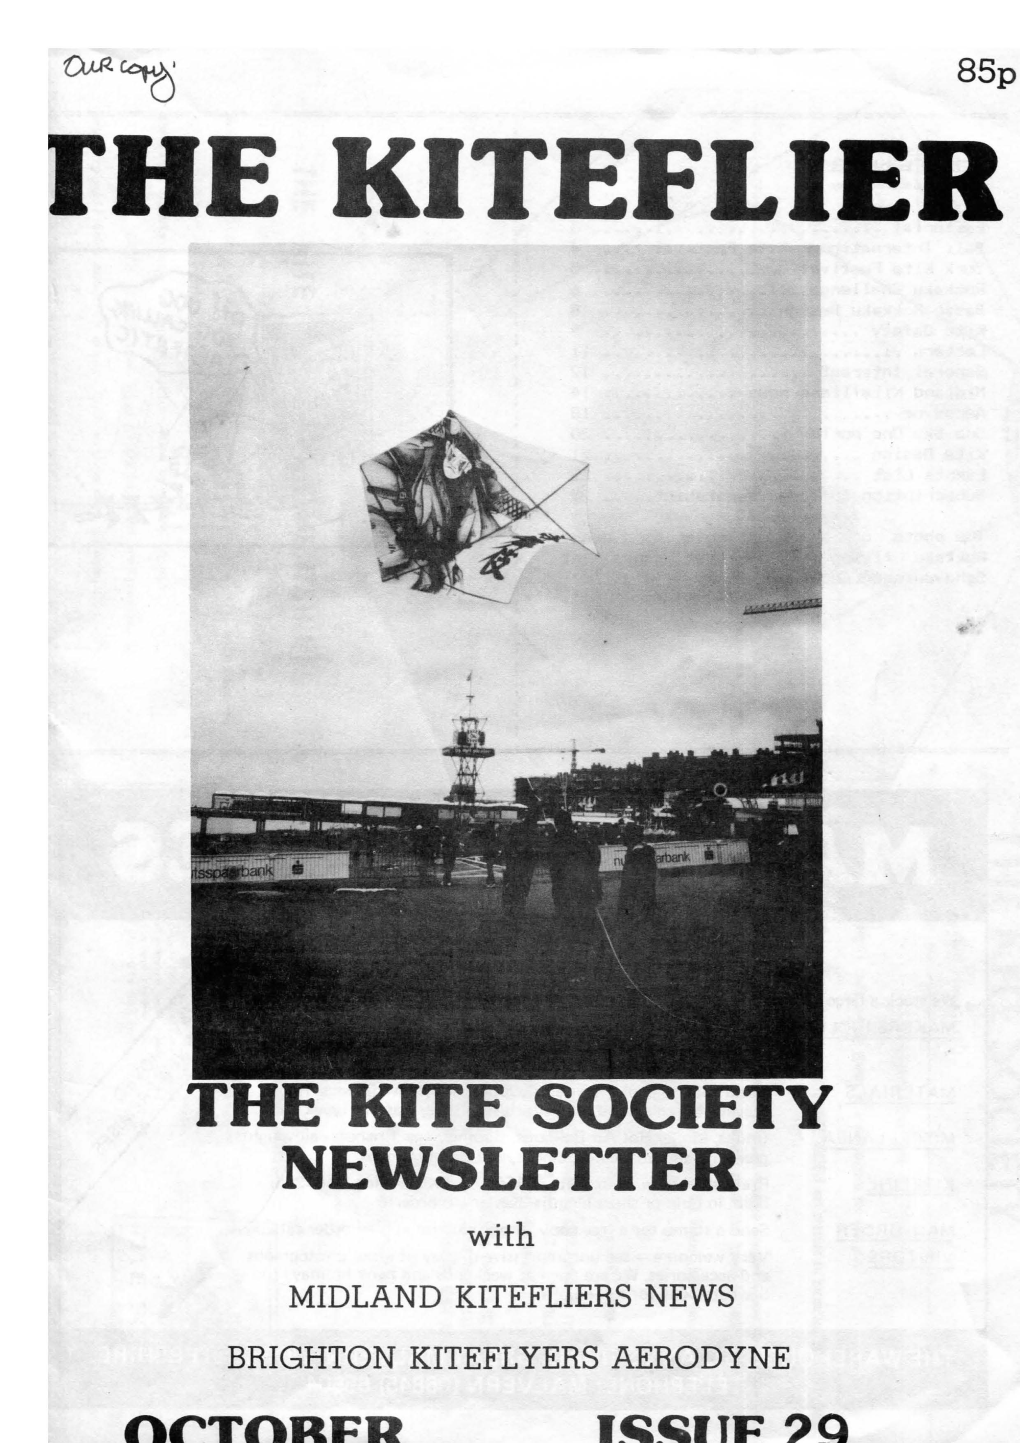 THE KITE SOCIETY NEWSLETTER with MIDLAND KITEFLIERS NEWS